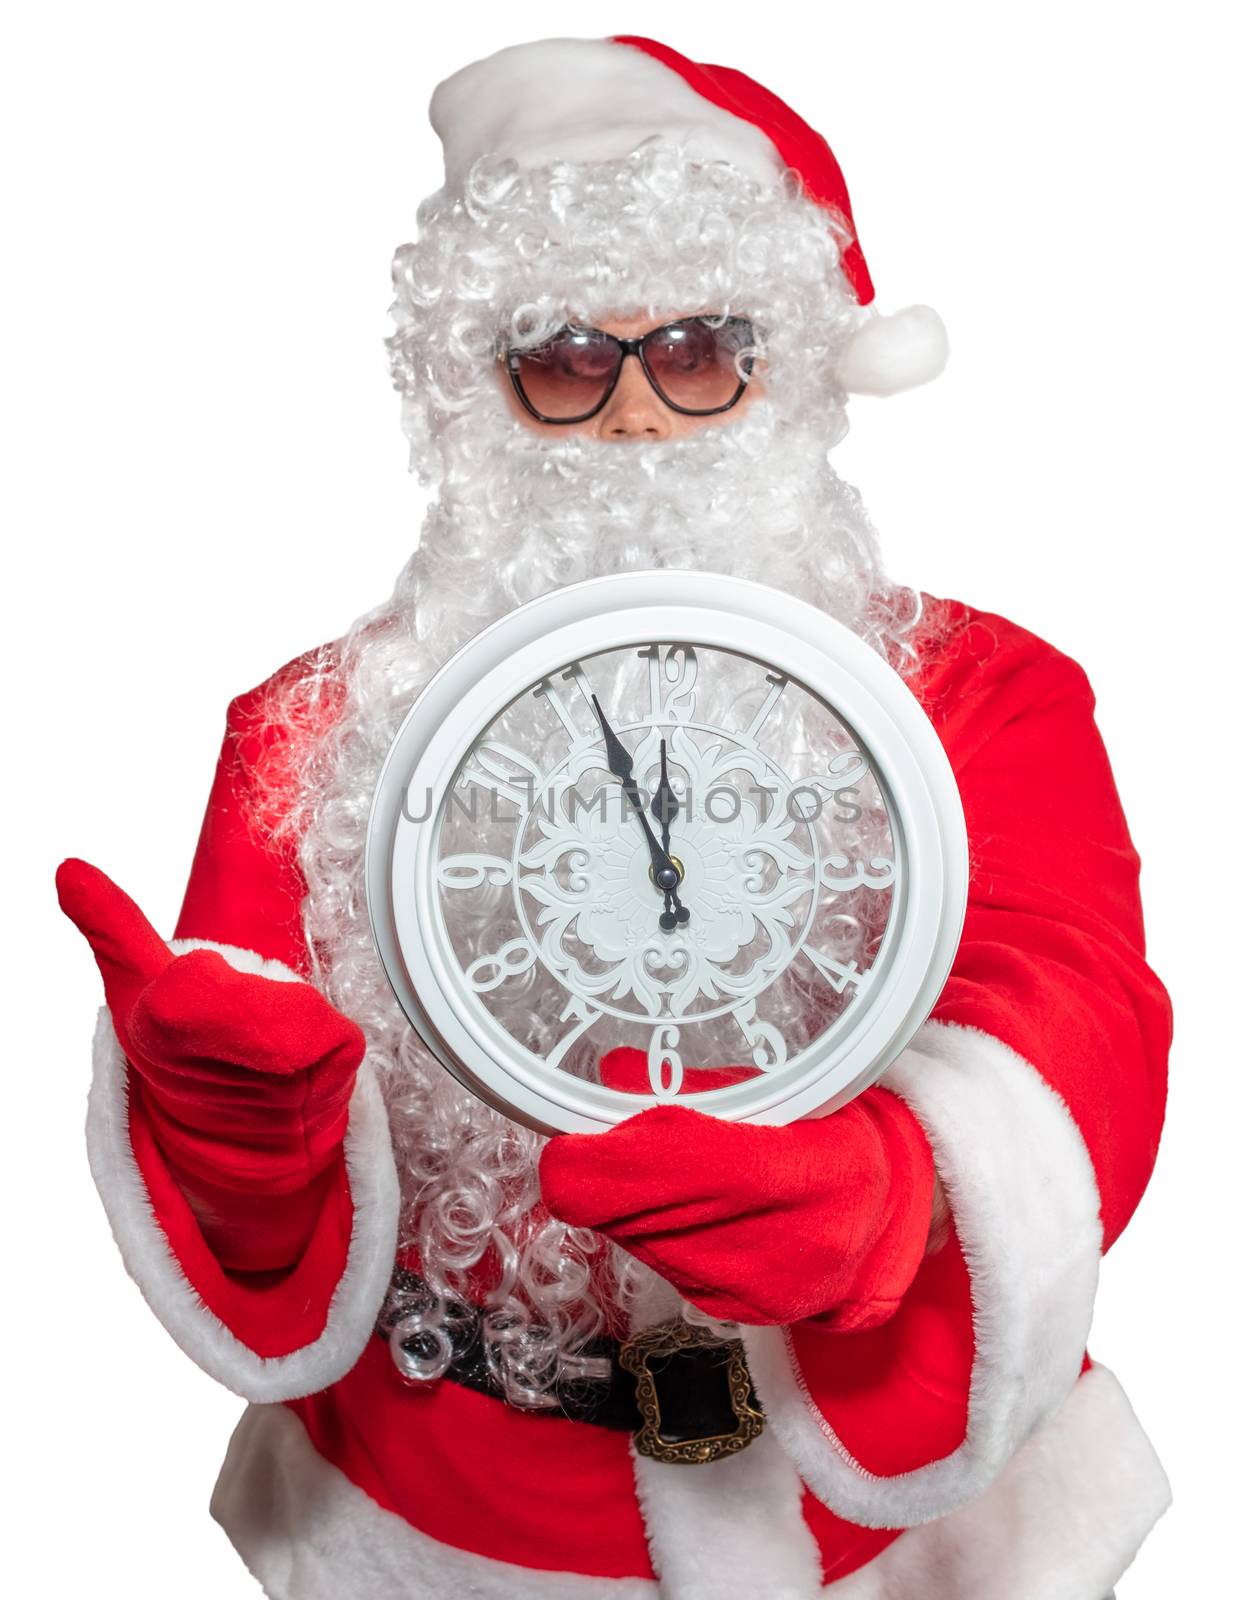 Santa Claus holding a white clock which shows five minutes to midnight. New year's eve concept. He is wearing sunglasses, long white beard. Isolated on white background by DamantisZ